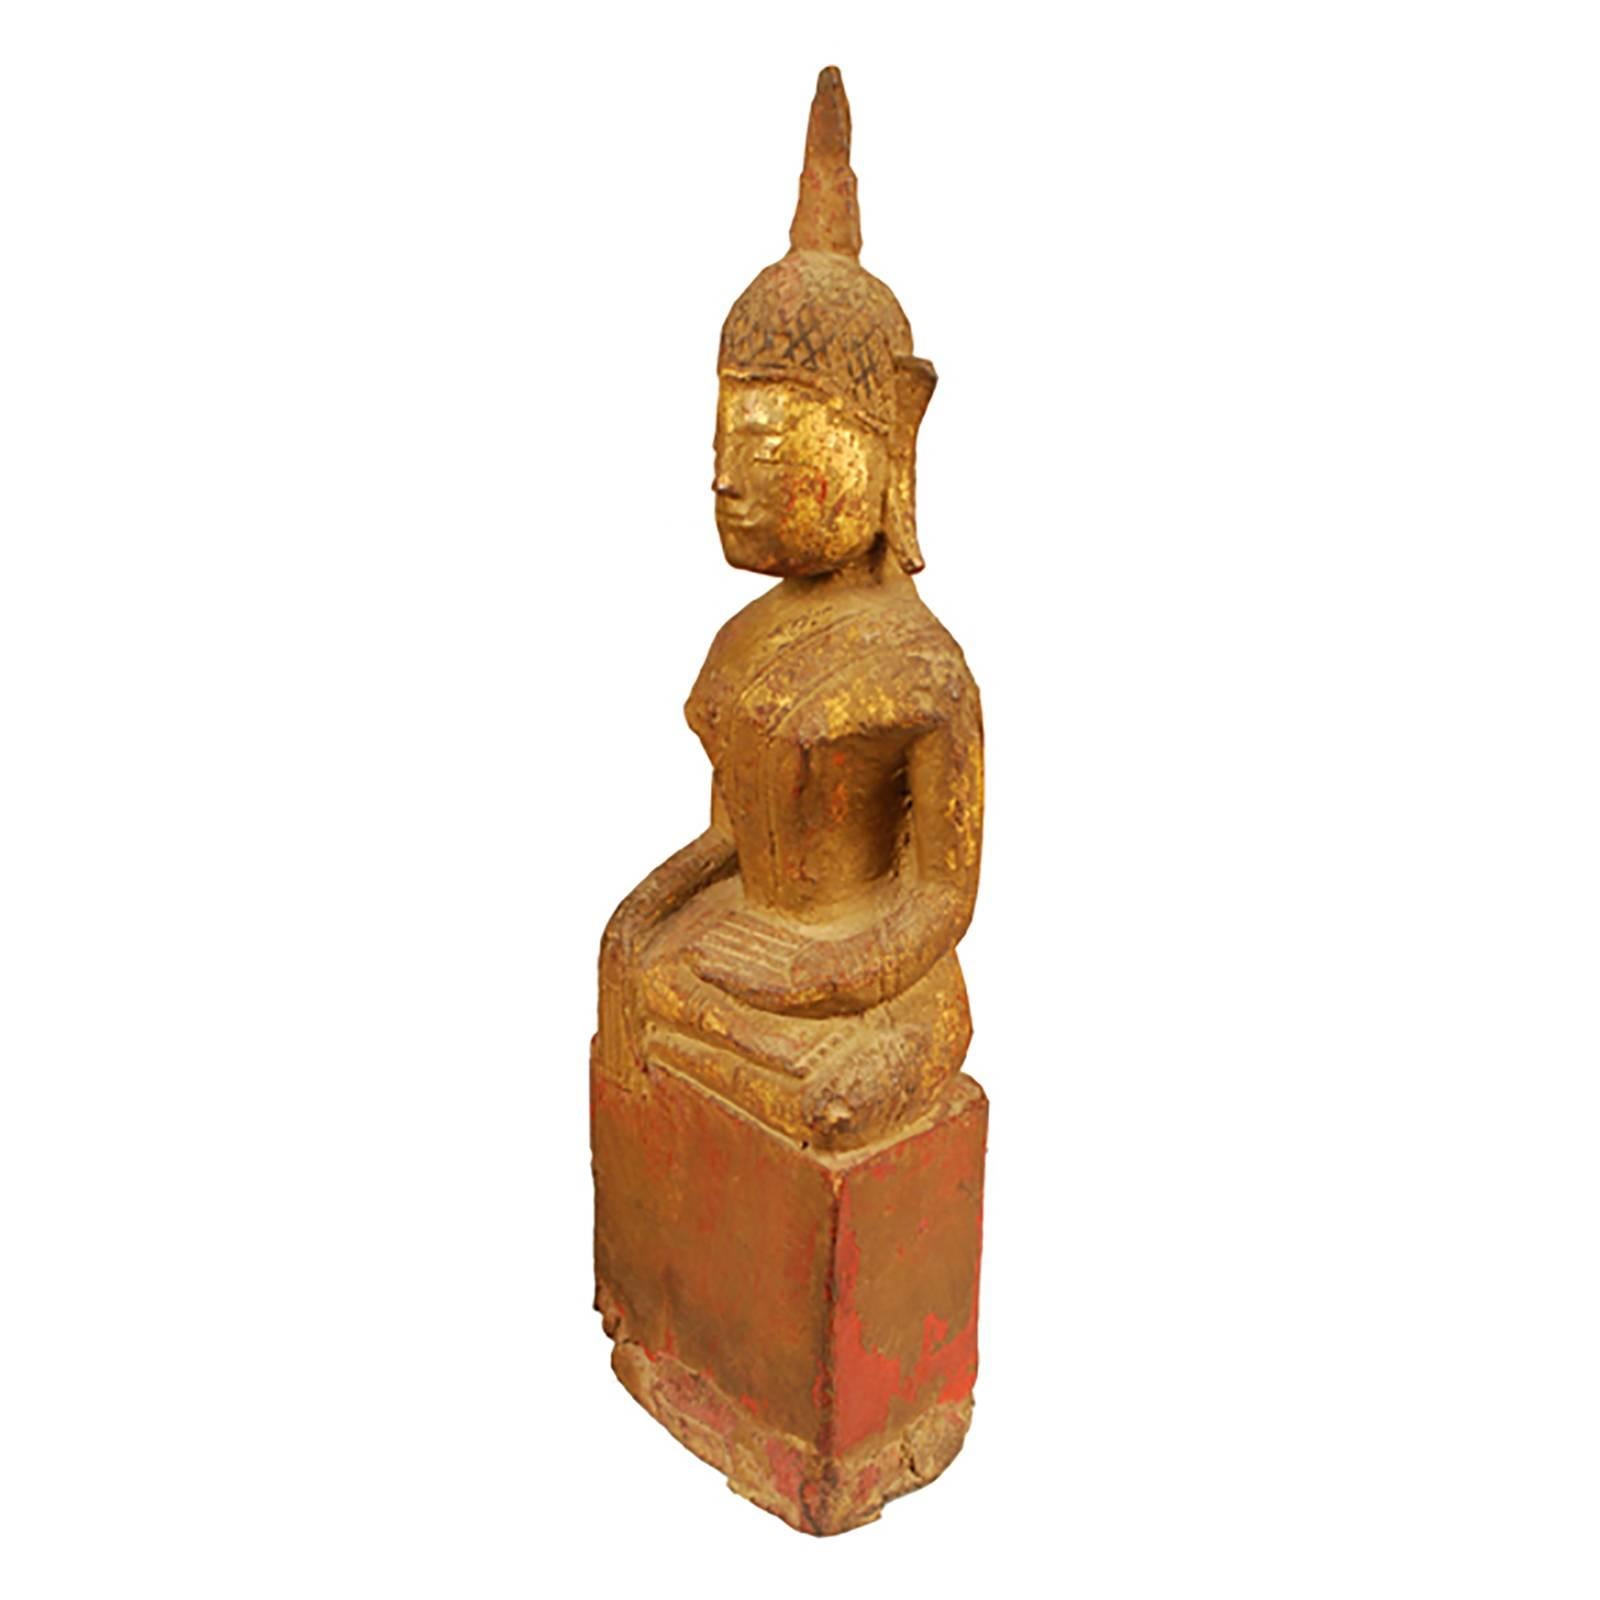 This simple, finely rendered wooden Buddha was hand-carved over a century ago in Thailand. The creator focused their intricate detailing on the head and face. While many similar Buddha sculptures involve finely wrought seats, this piece draws the